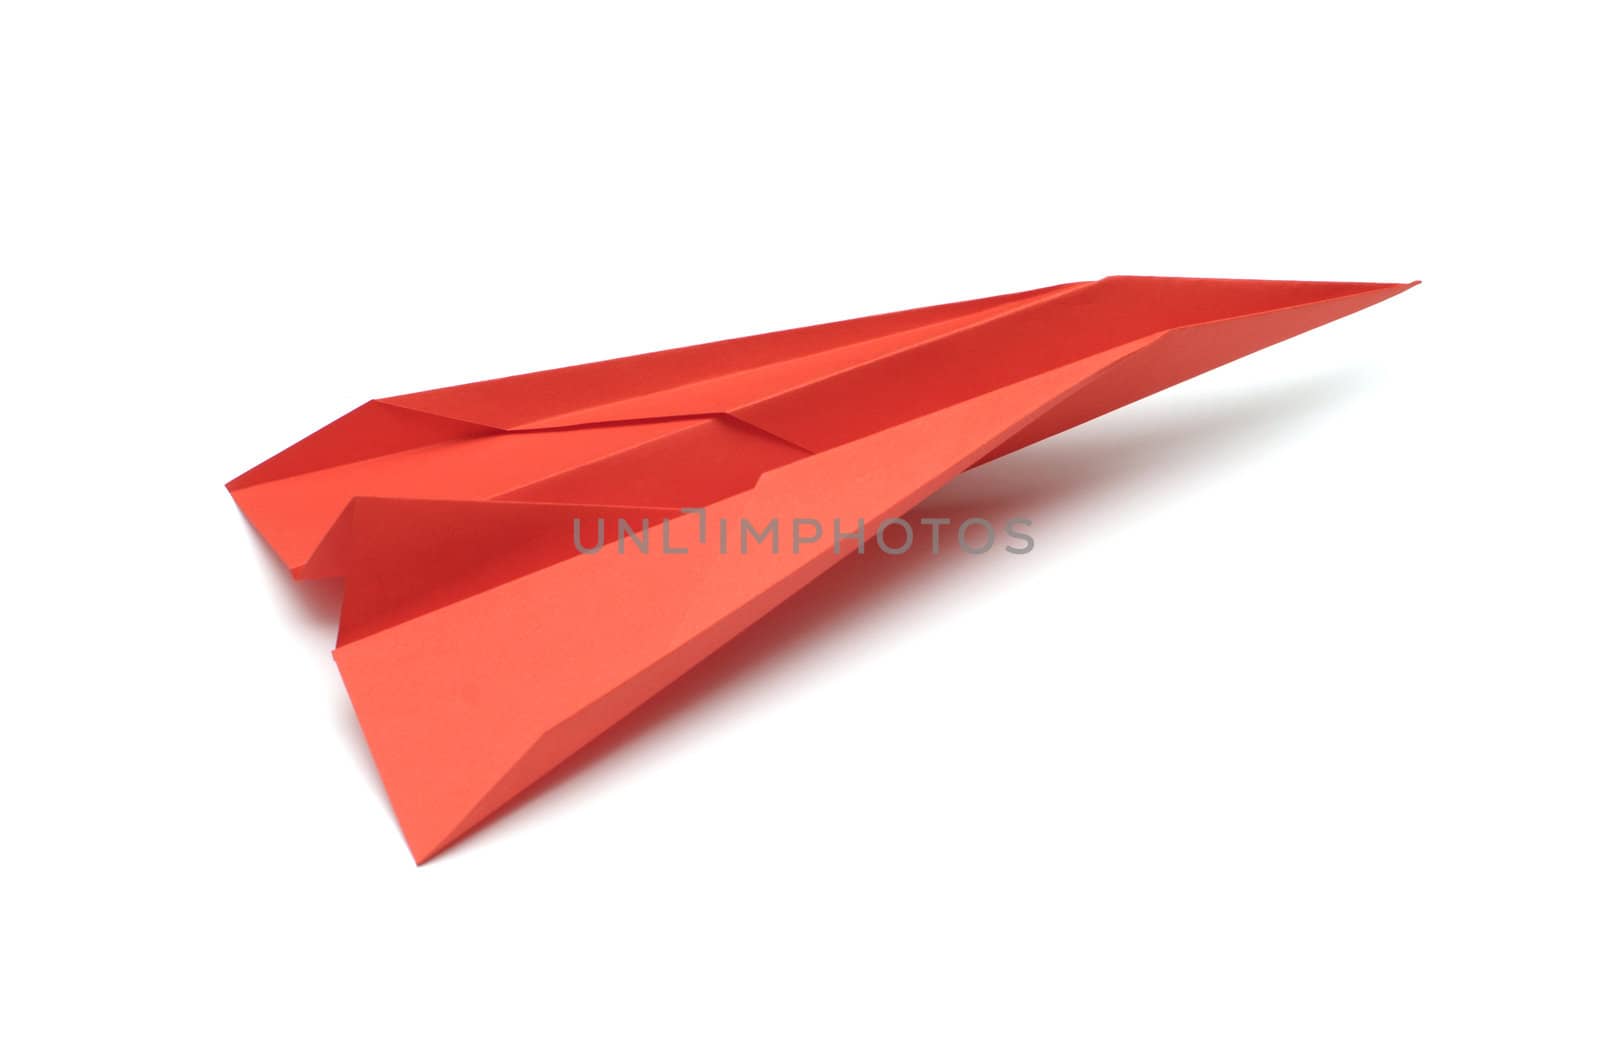 Paper airplane on white background by DNKSTUDIO